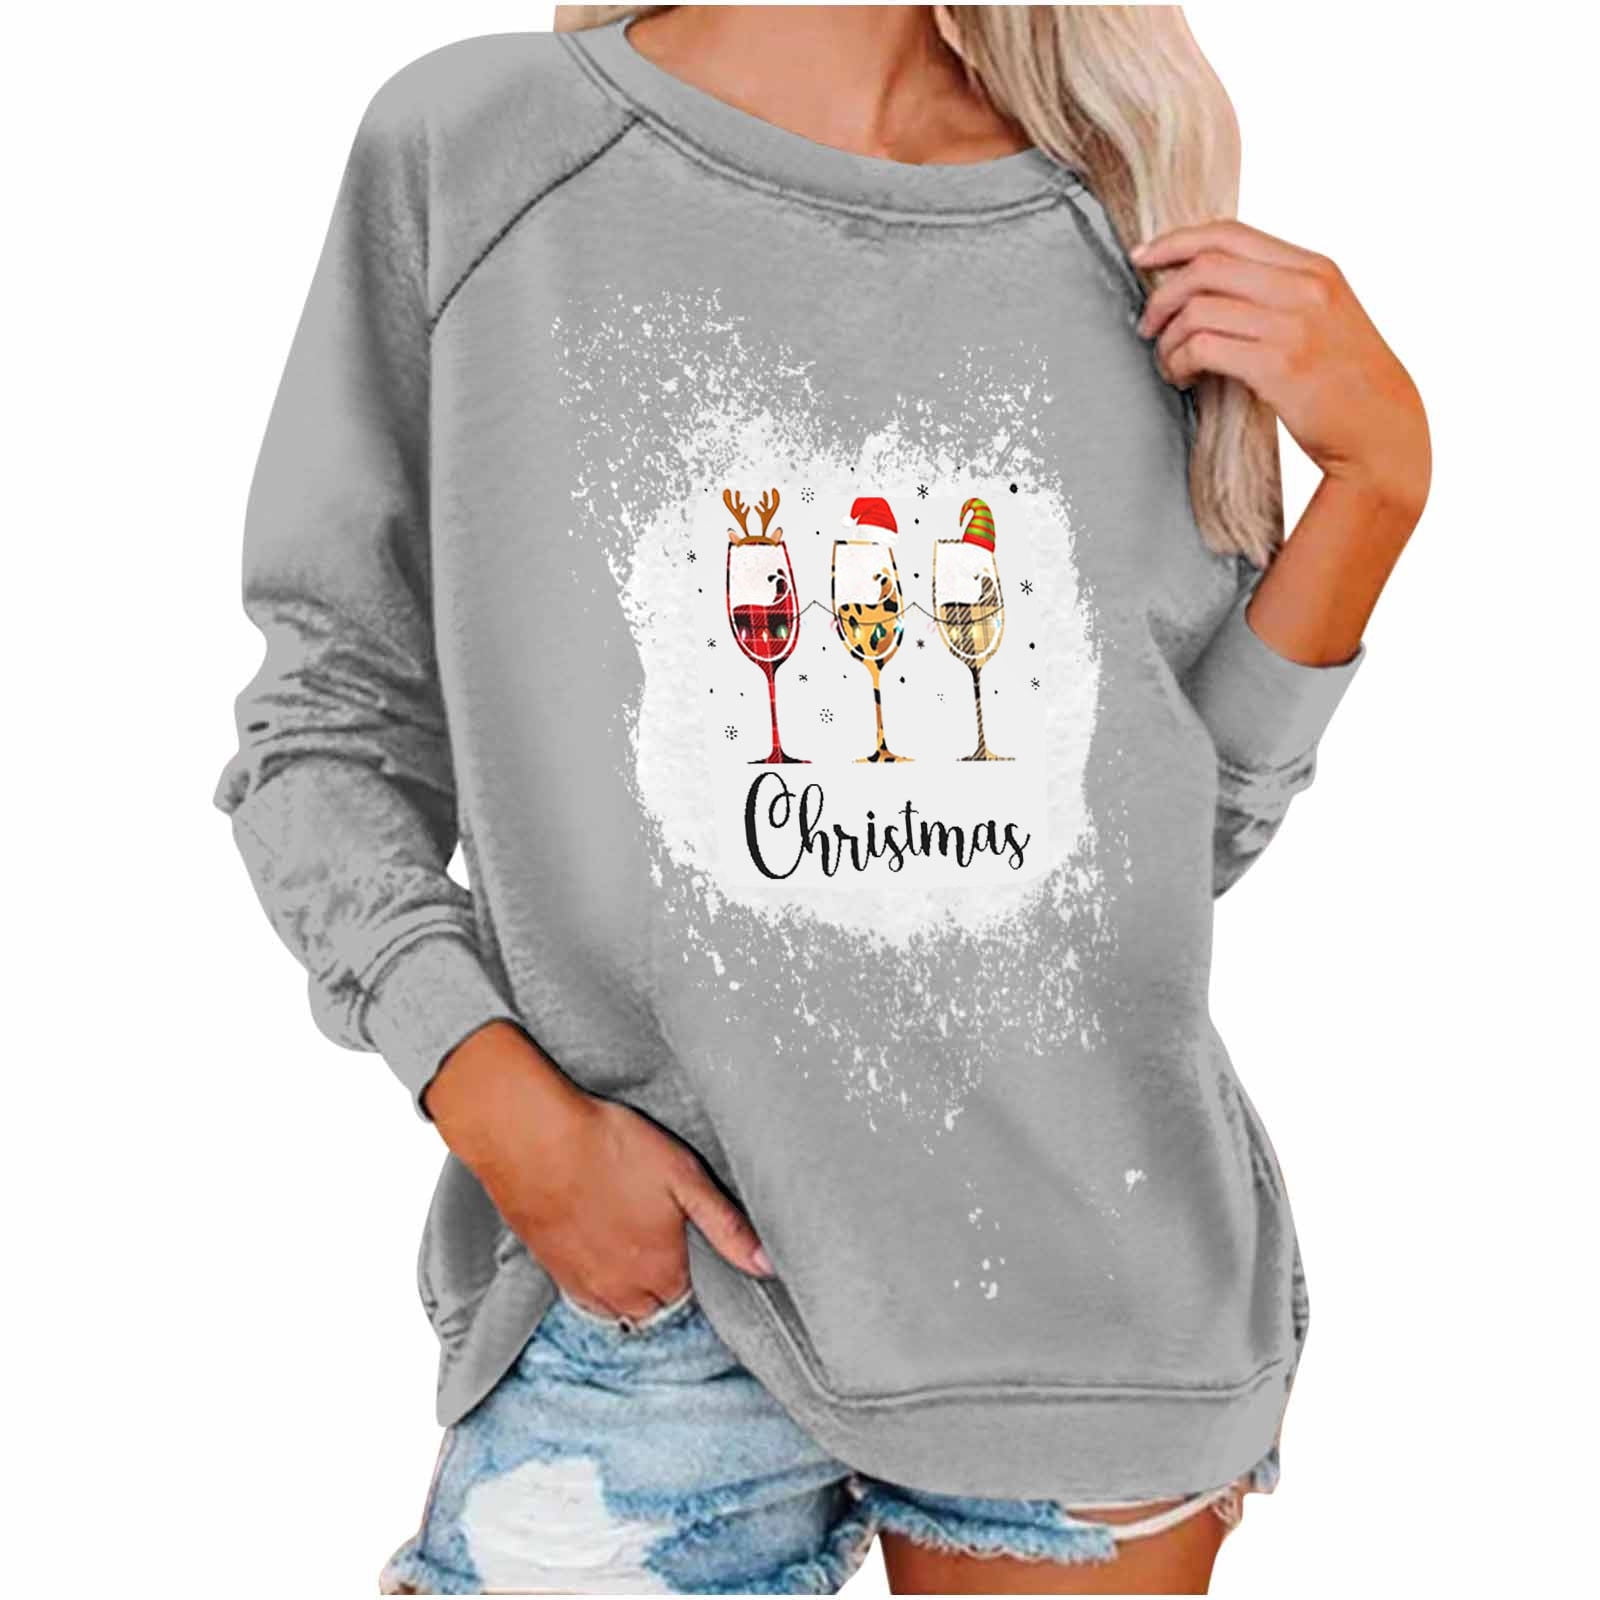 Same Day Delivery Items Prime Womens Sweatshirts Crew Neck Long Sleeve Tops  Casual Funny Printed Pullovers Xmas Holiday Sweatshirts at  Women's  Clothing store